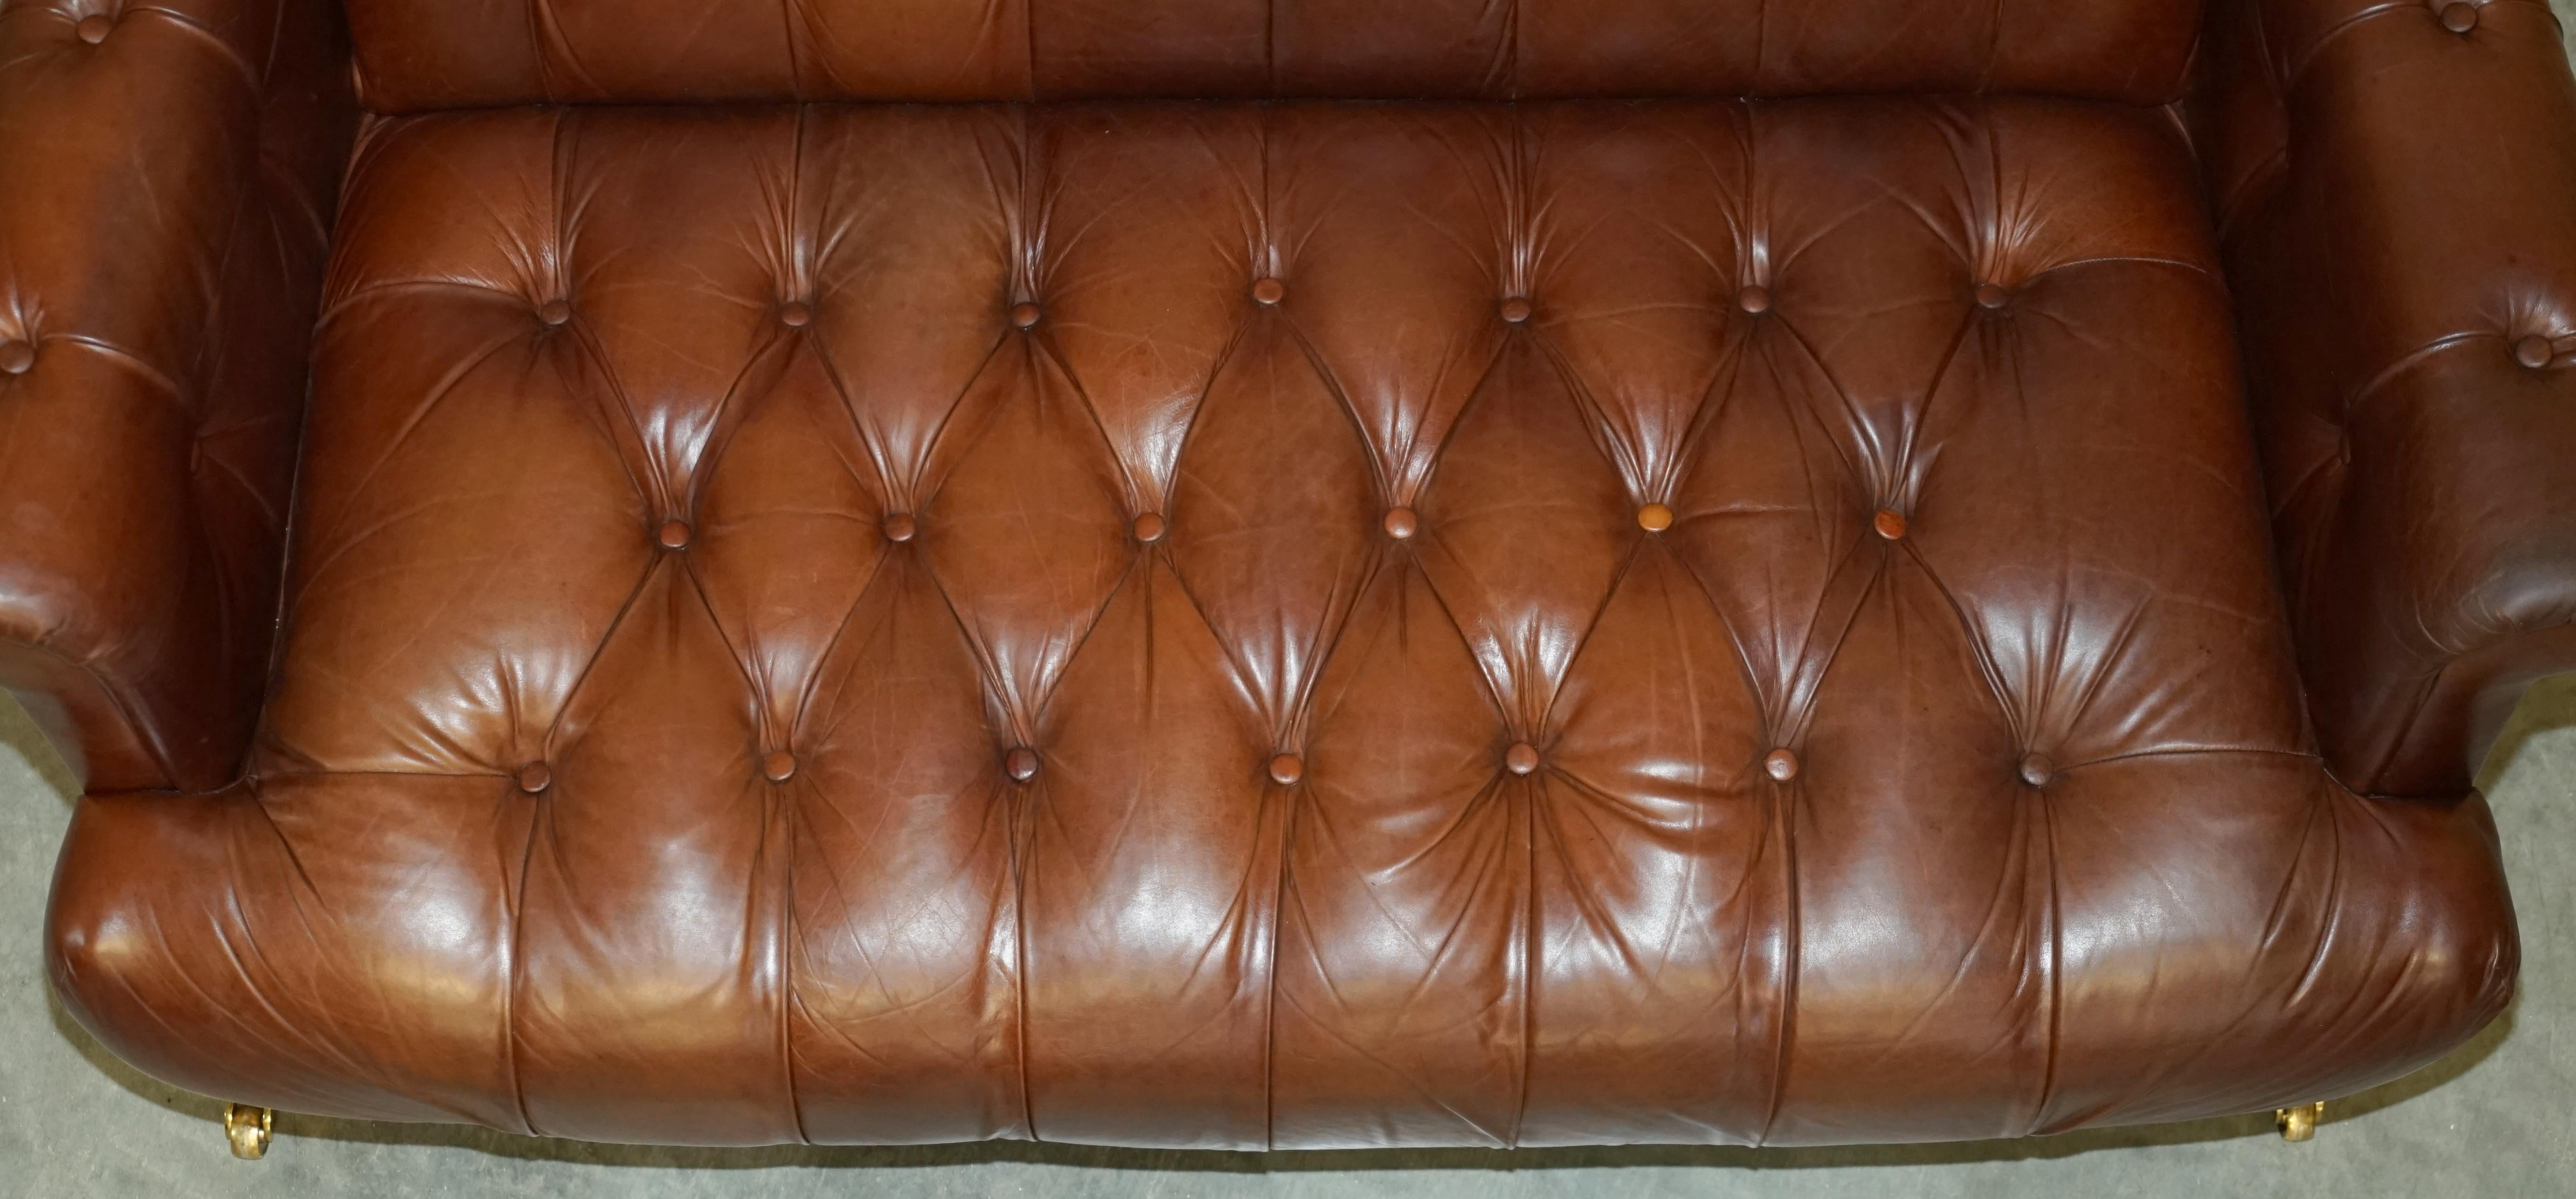 FiNE CHESTNUT BROWN LEATHER LAUREN ASHLEY CHESTERFIELD TWO SEAT LIBRARY SOFa im Angebot 9